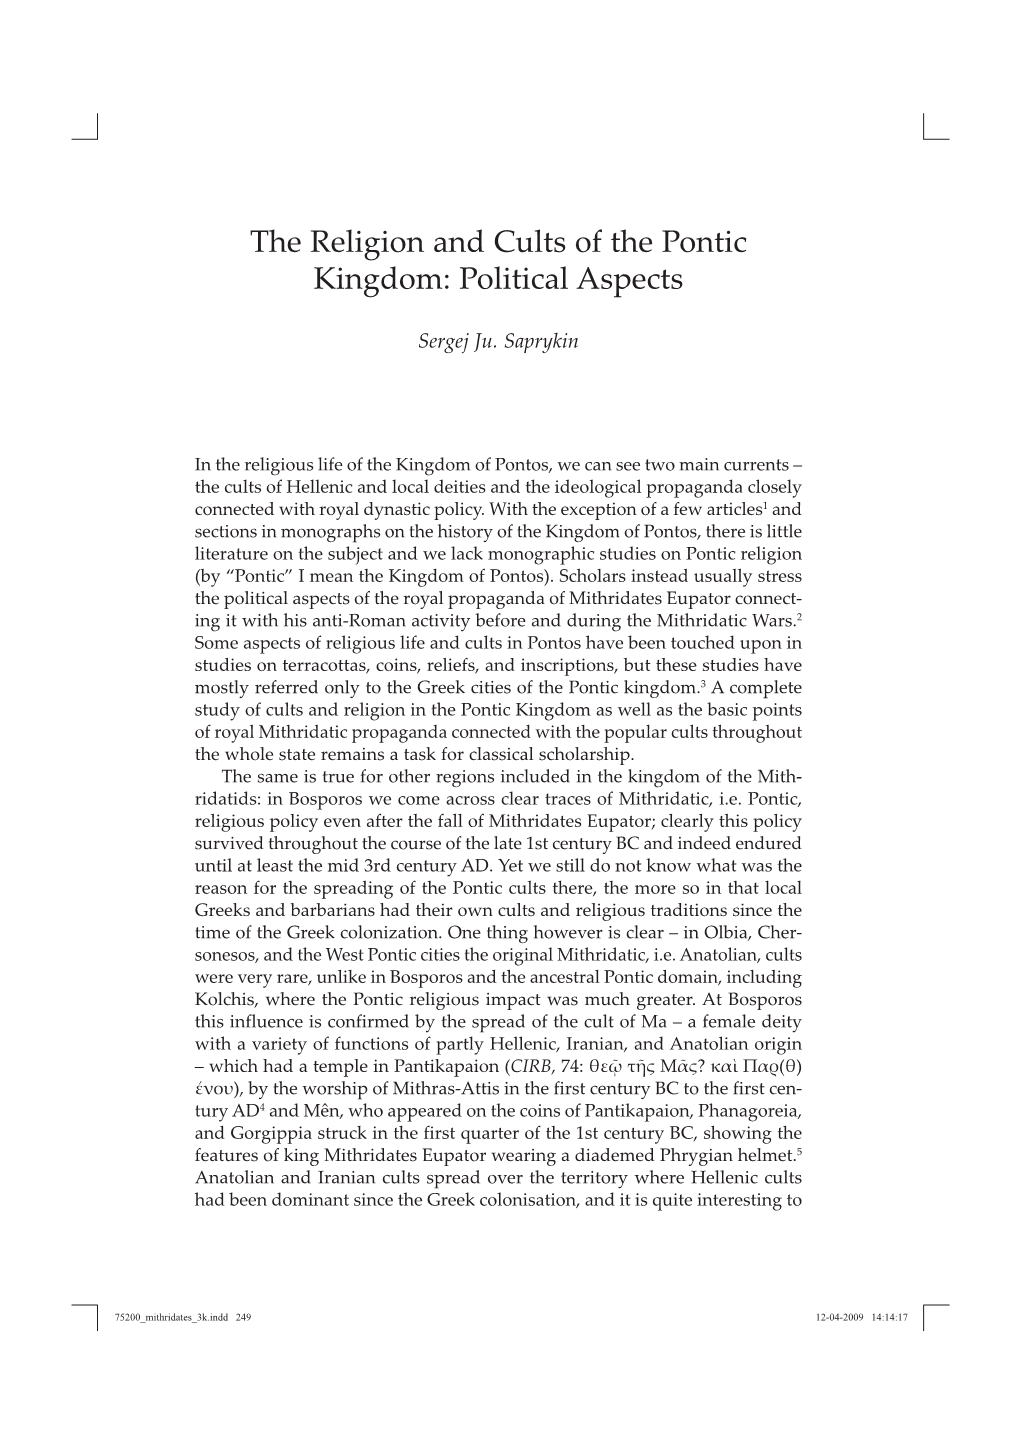 The Religion and Cults of the Pontic Kingdom: Political Aspects